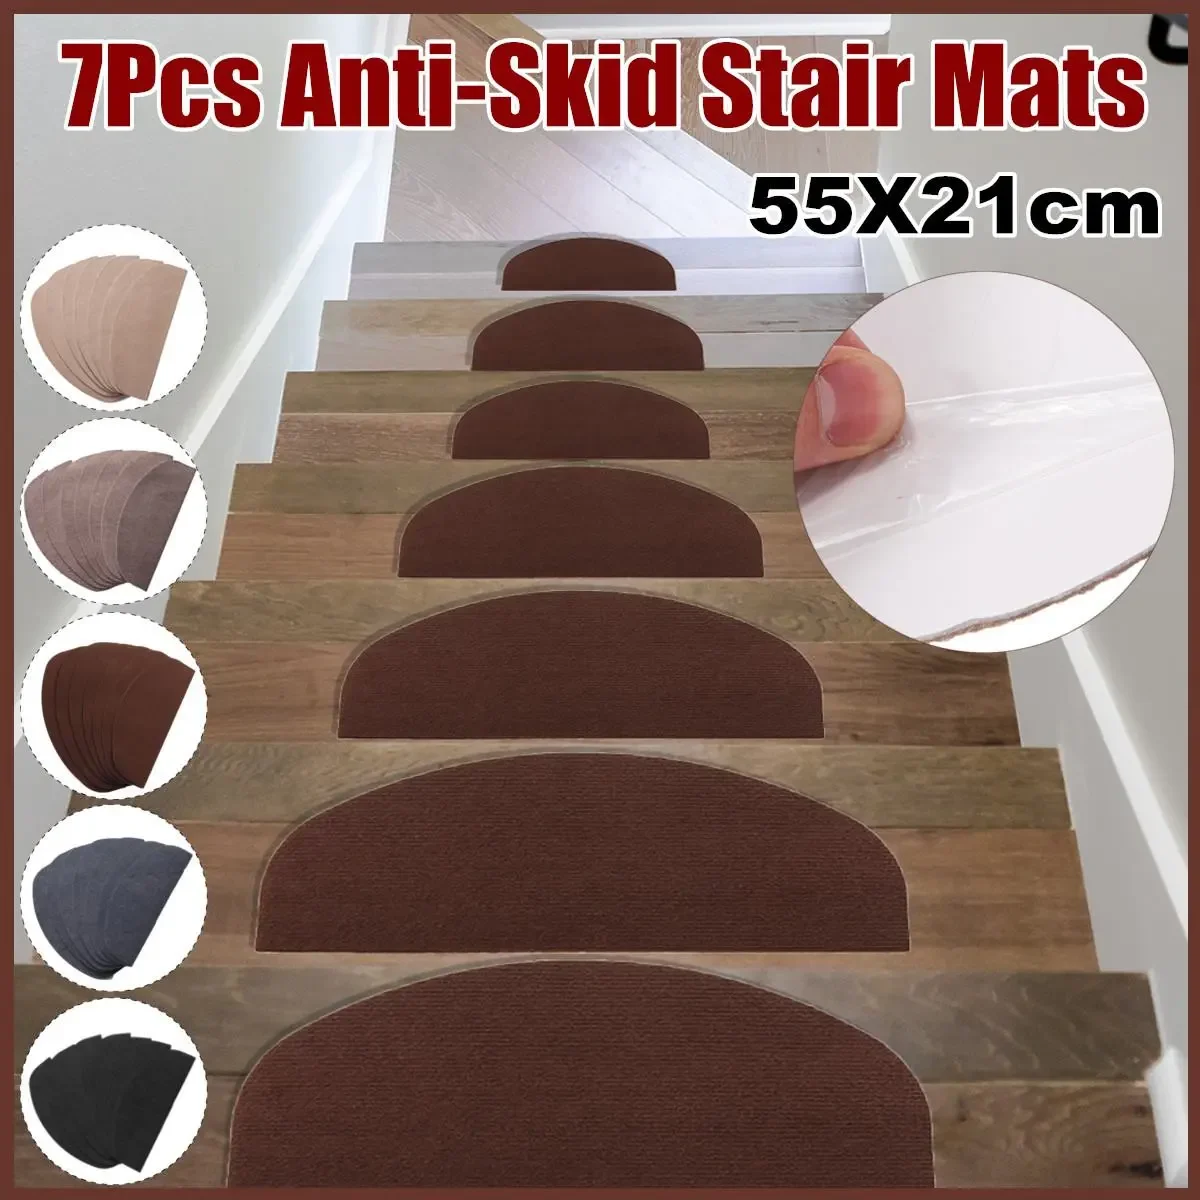 

5 Colors 7Pcs Set PVC Self-adhesive Stair Treads 55x21cm Freely-Cut Non-slip Rugs Stair Mats Pads Carpet Home Safety Pads Mat